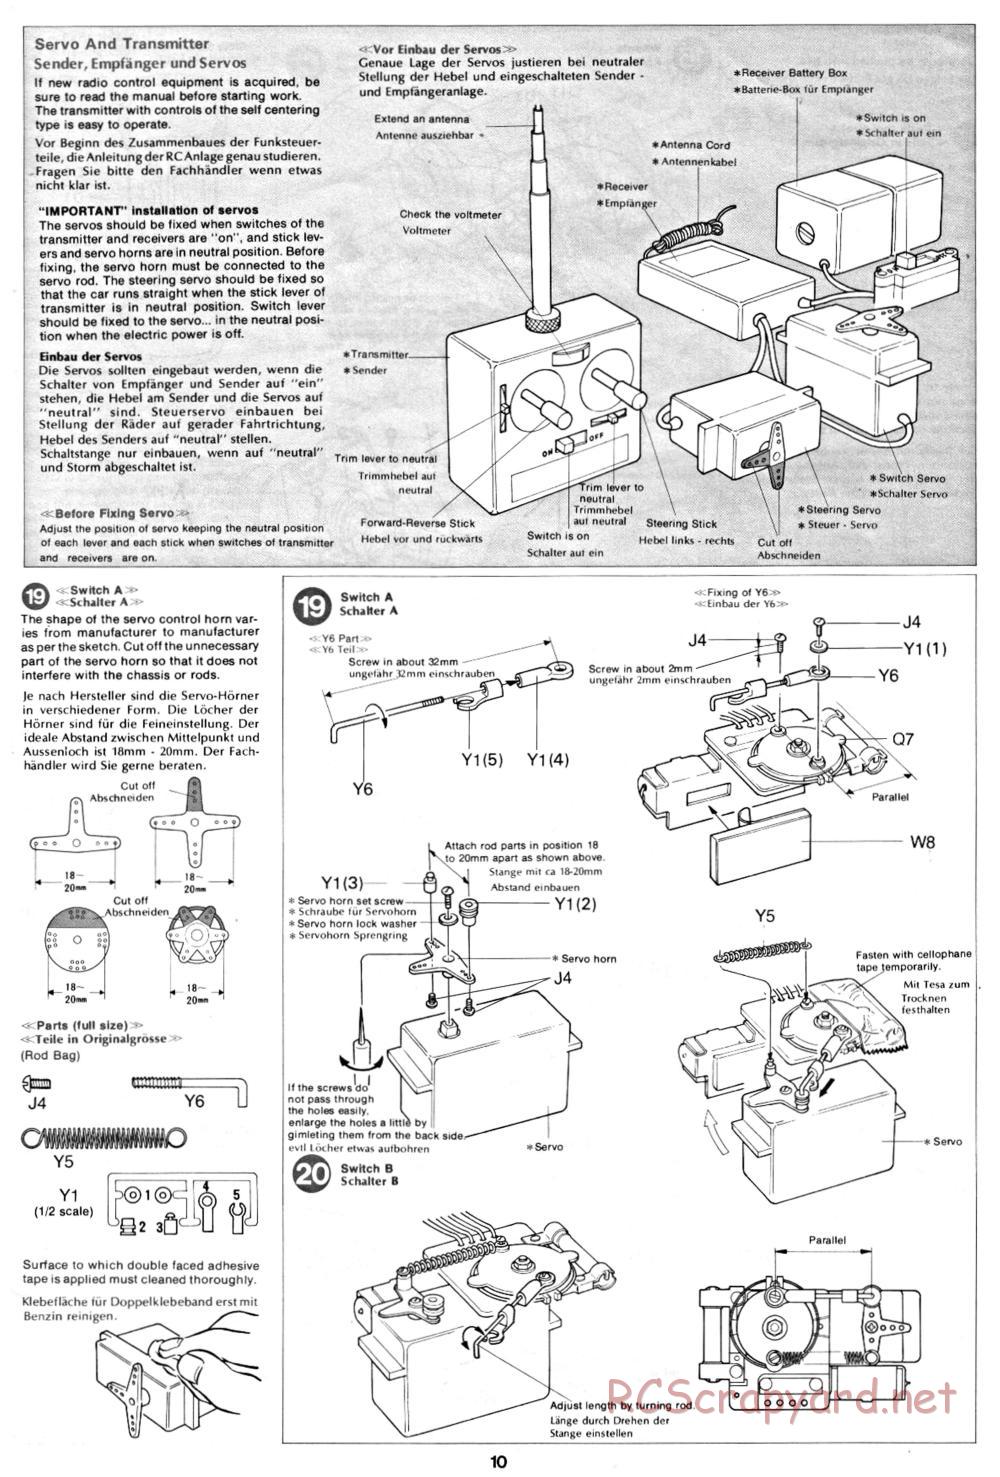 Tamiya - XR311 Combat Support Vehicle (1977) Chassis - Manual - Page 10